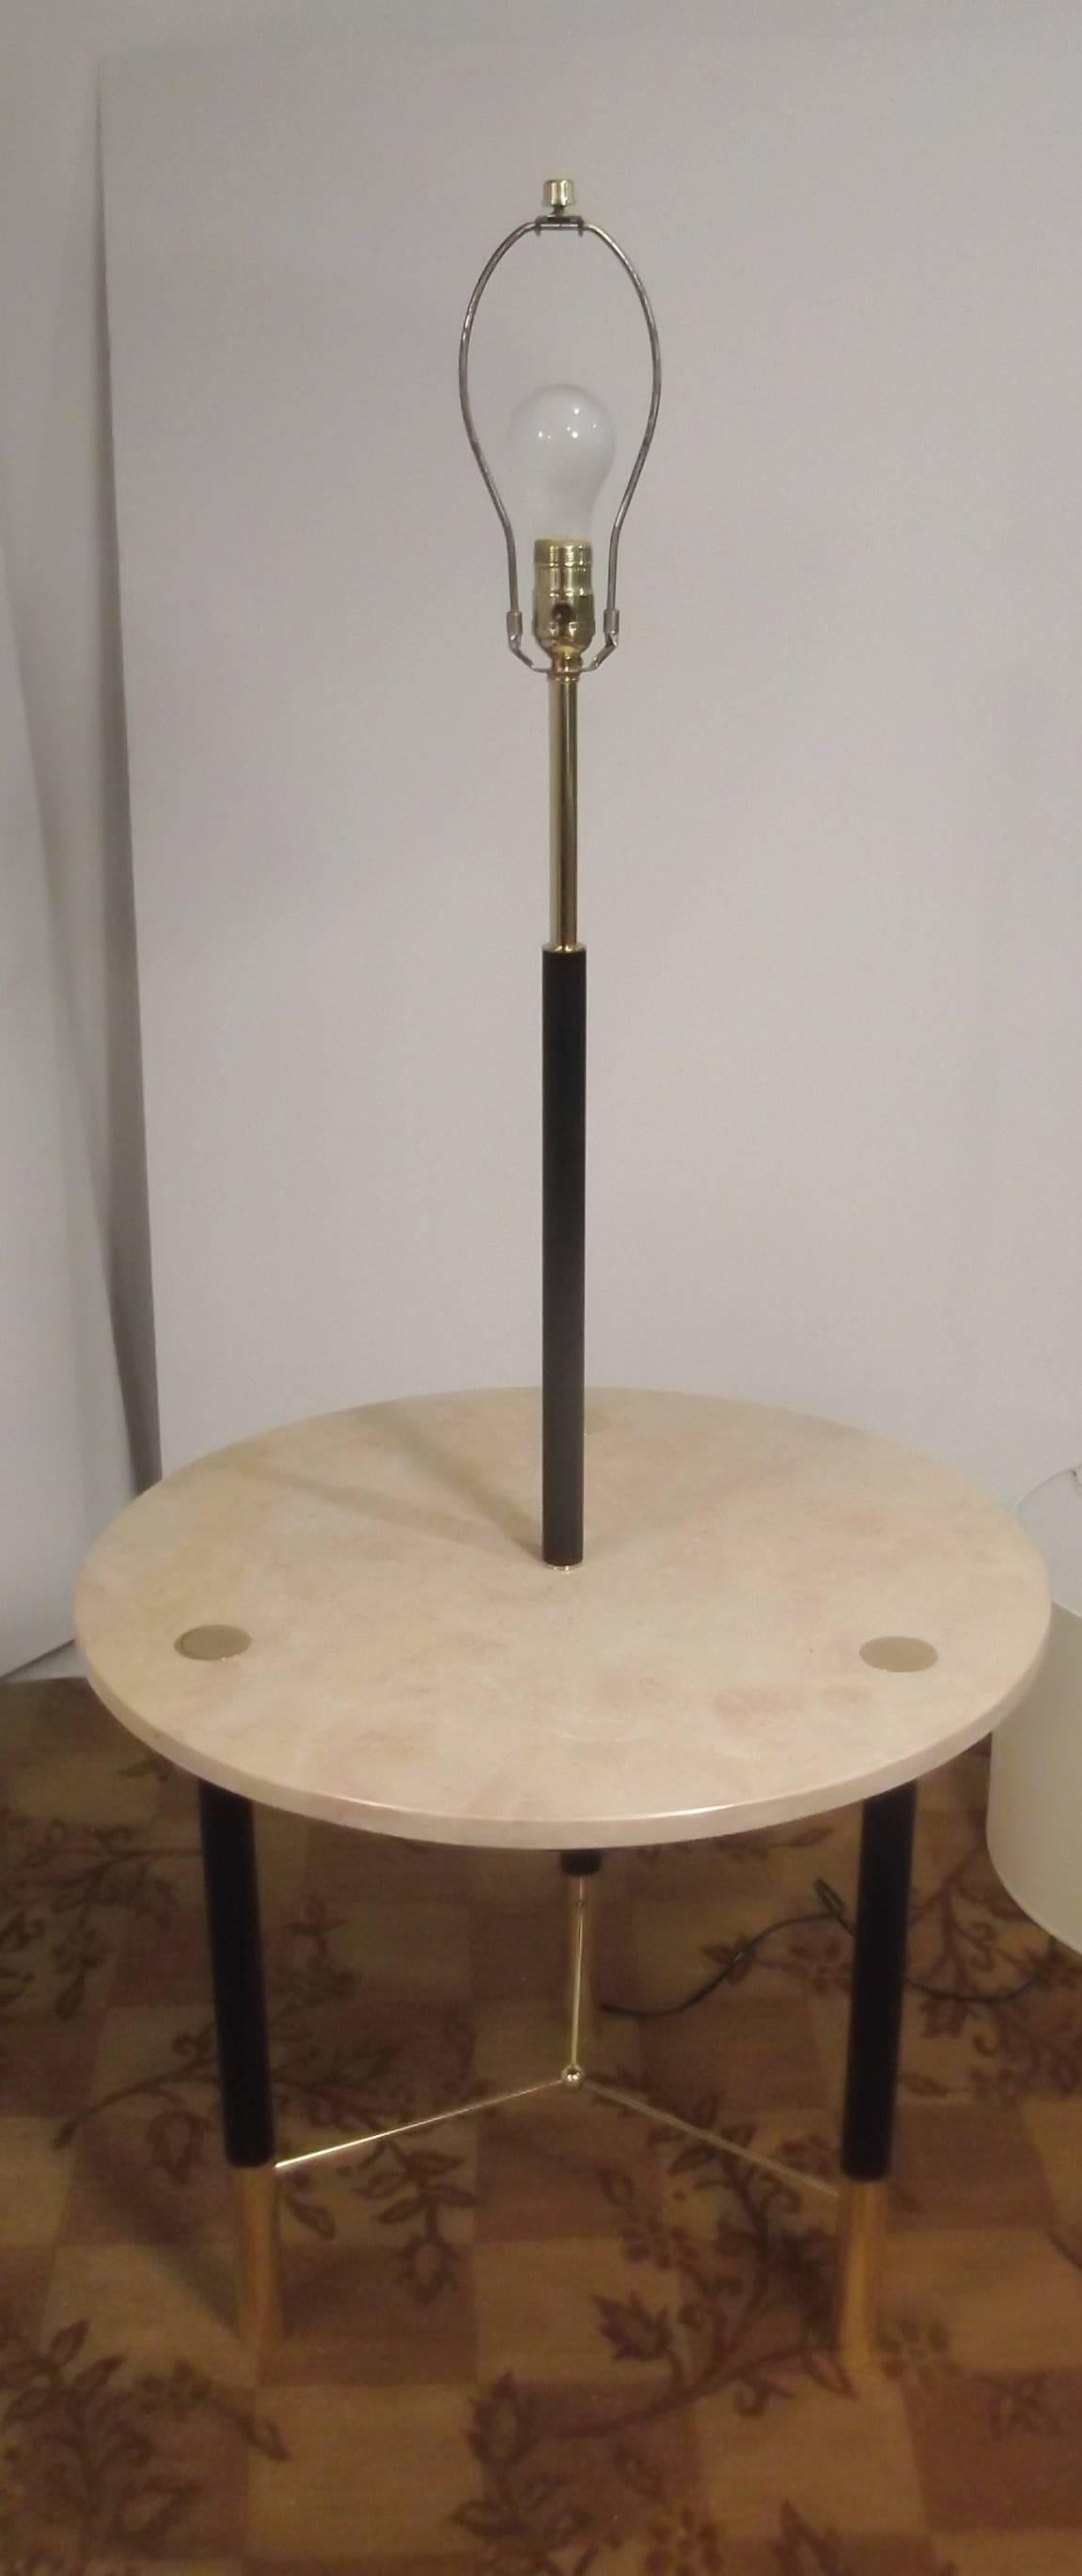 Authentic Harvey Probber marble top floor lamp with table.
The round marble top has polished brass "buttons" that anchor the ebony legs. The lamp portion is newly rewired and new lamp hardware, ready to use. The shade is for photographic